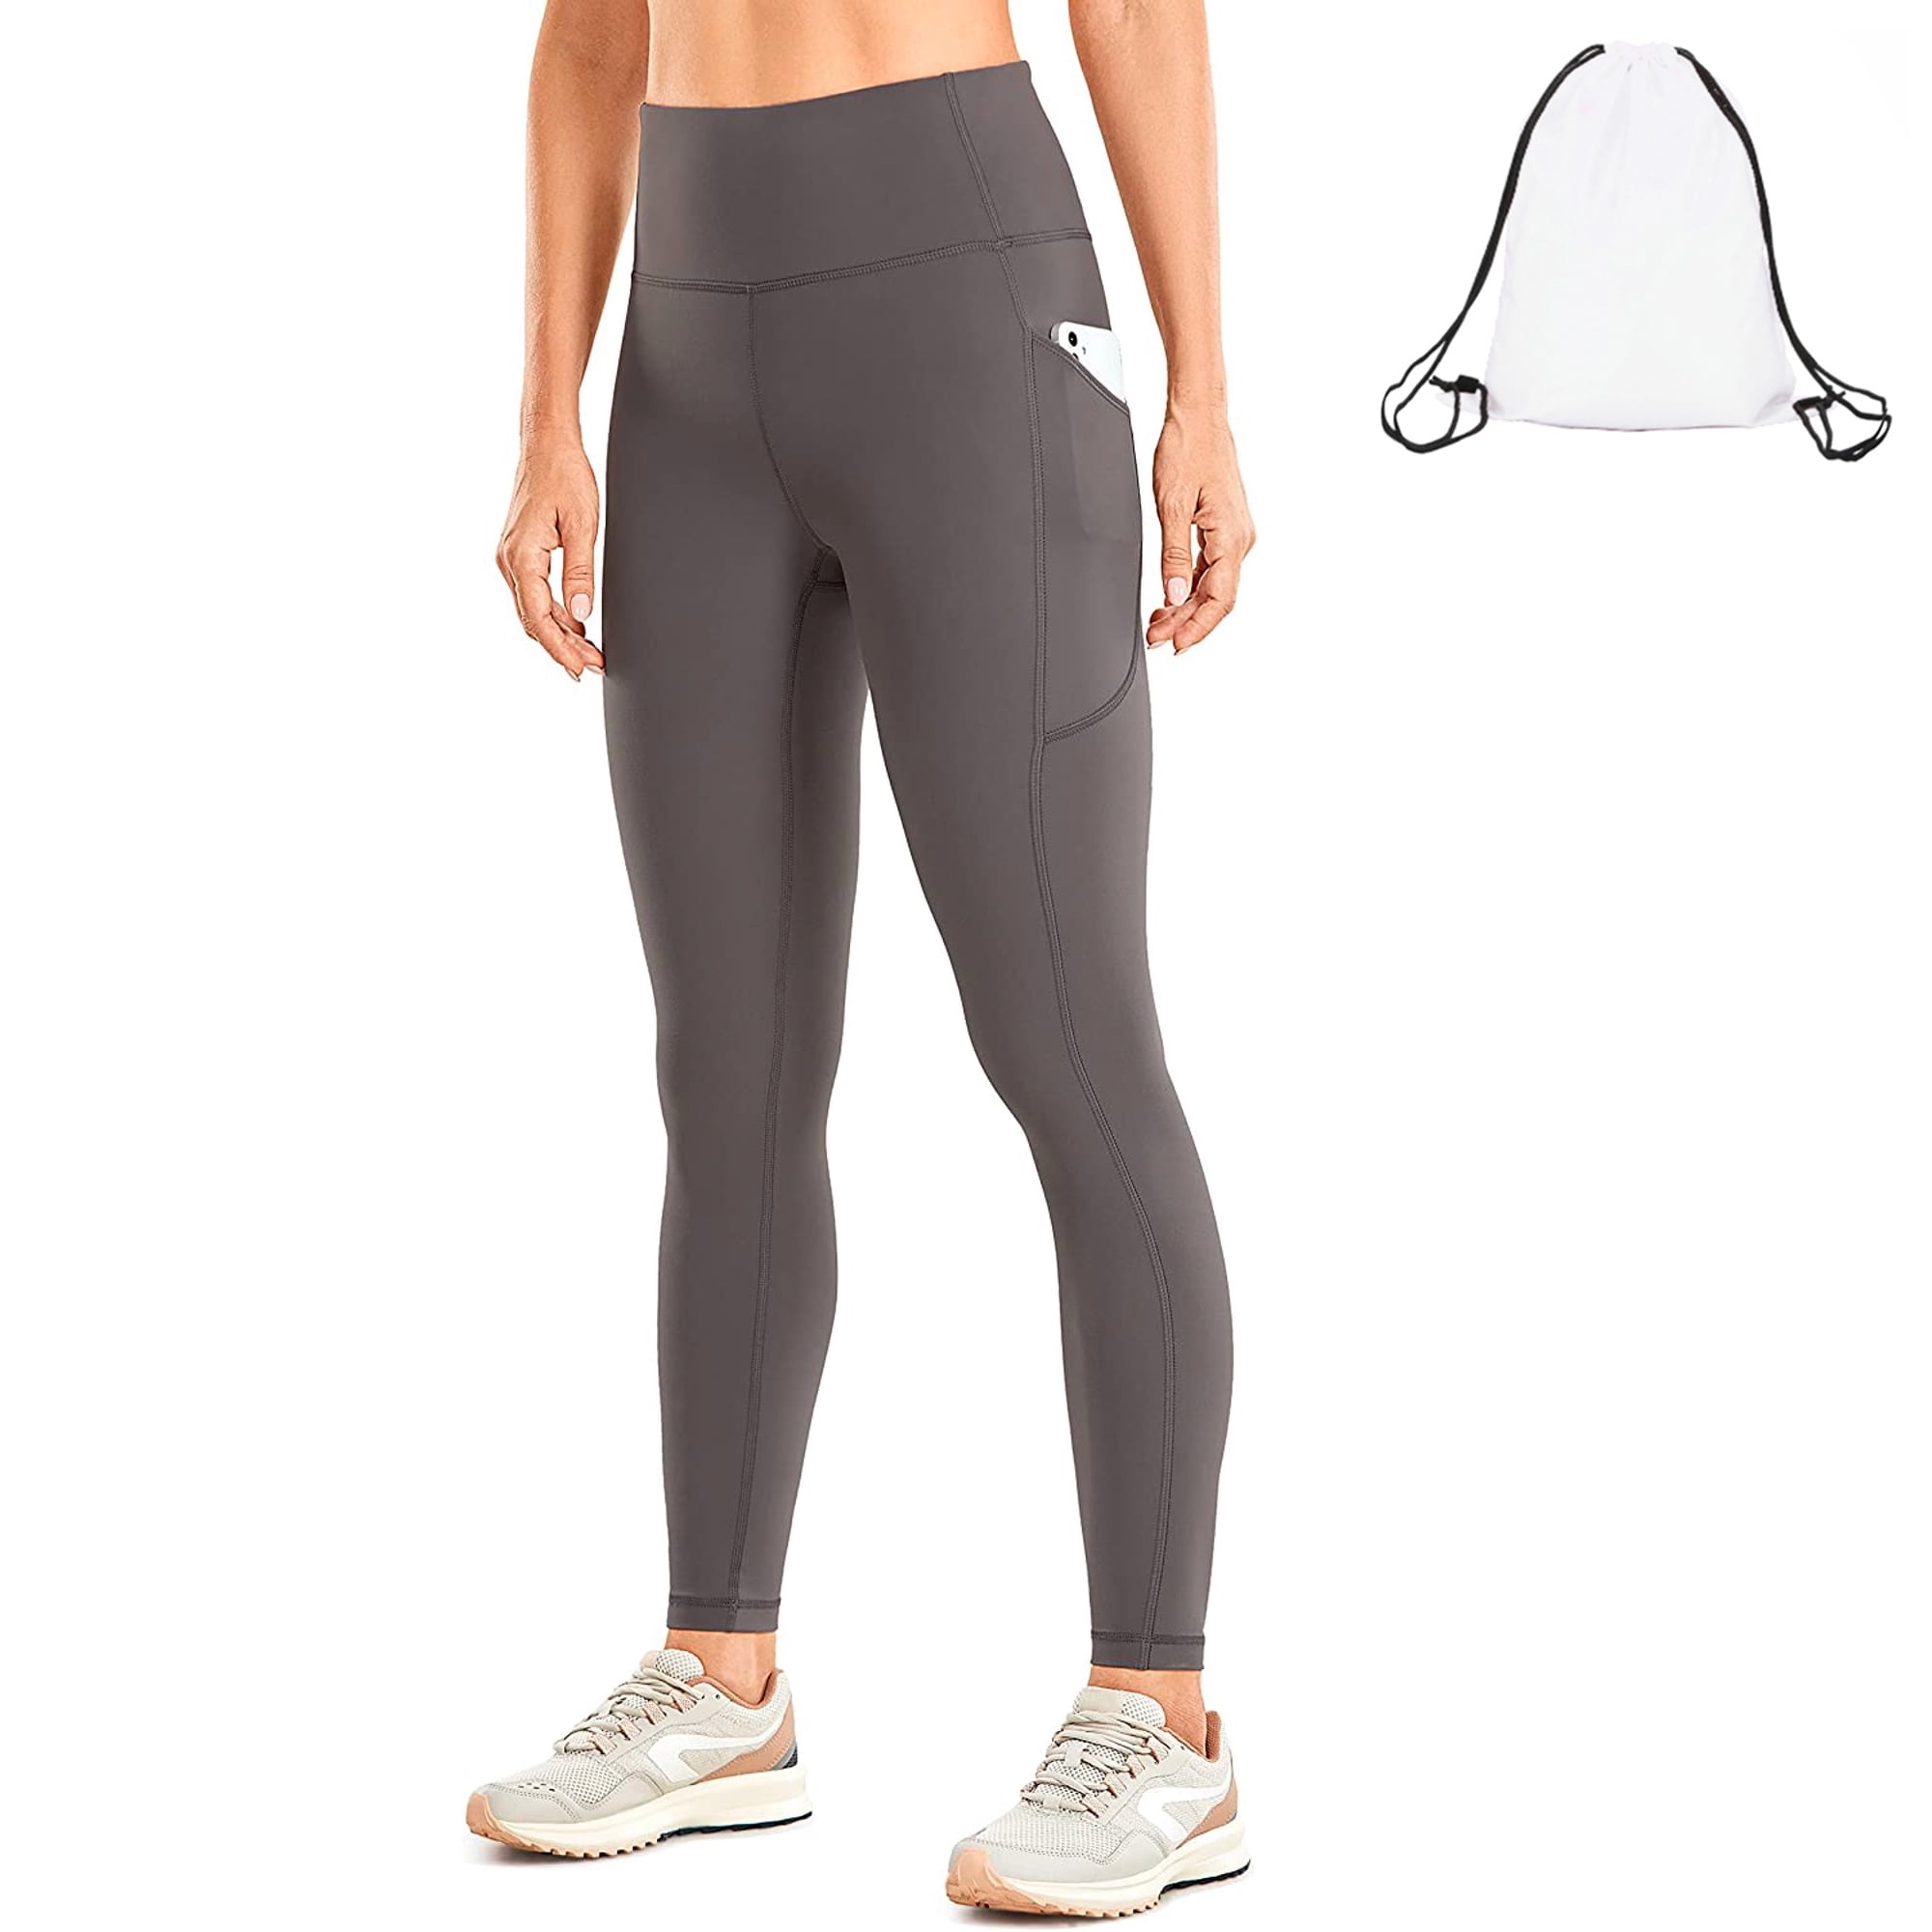 Women's Brushed Naked Feeling Workout Leggings 25 Inches - High Waist Matte  Soft Yoga Leggings with Pockets with A Free Gym Drawstring Bag Lulu Leggings  - Walmart.com